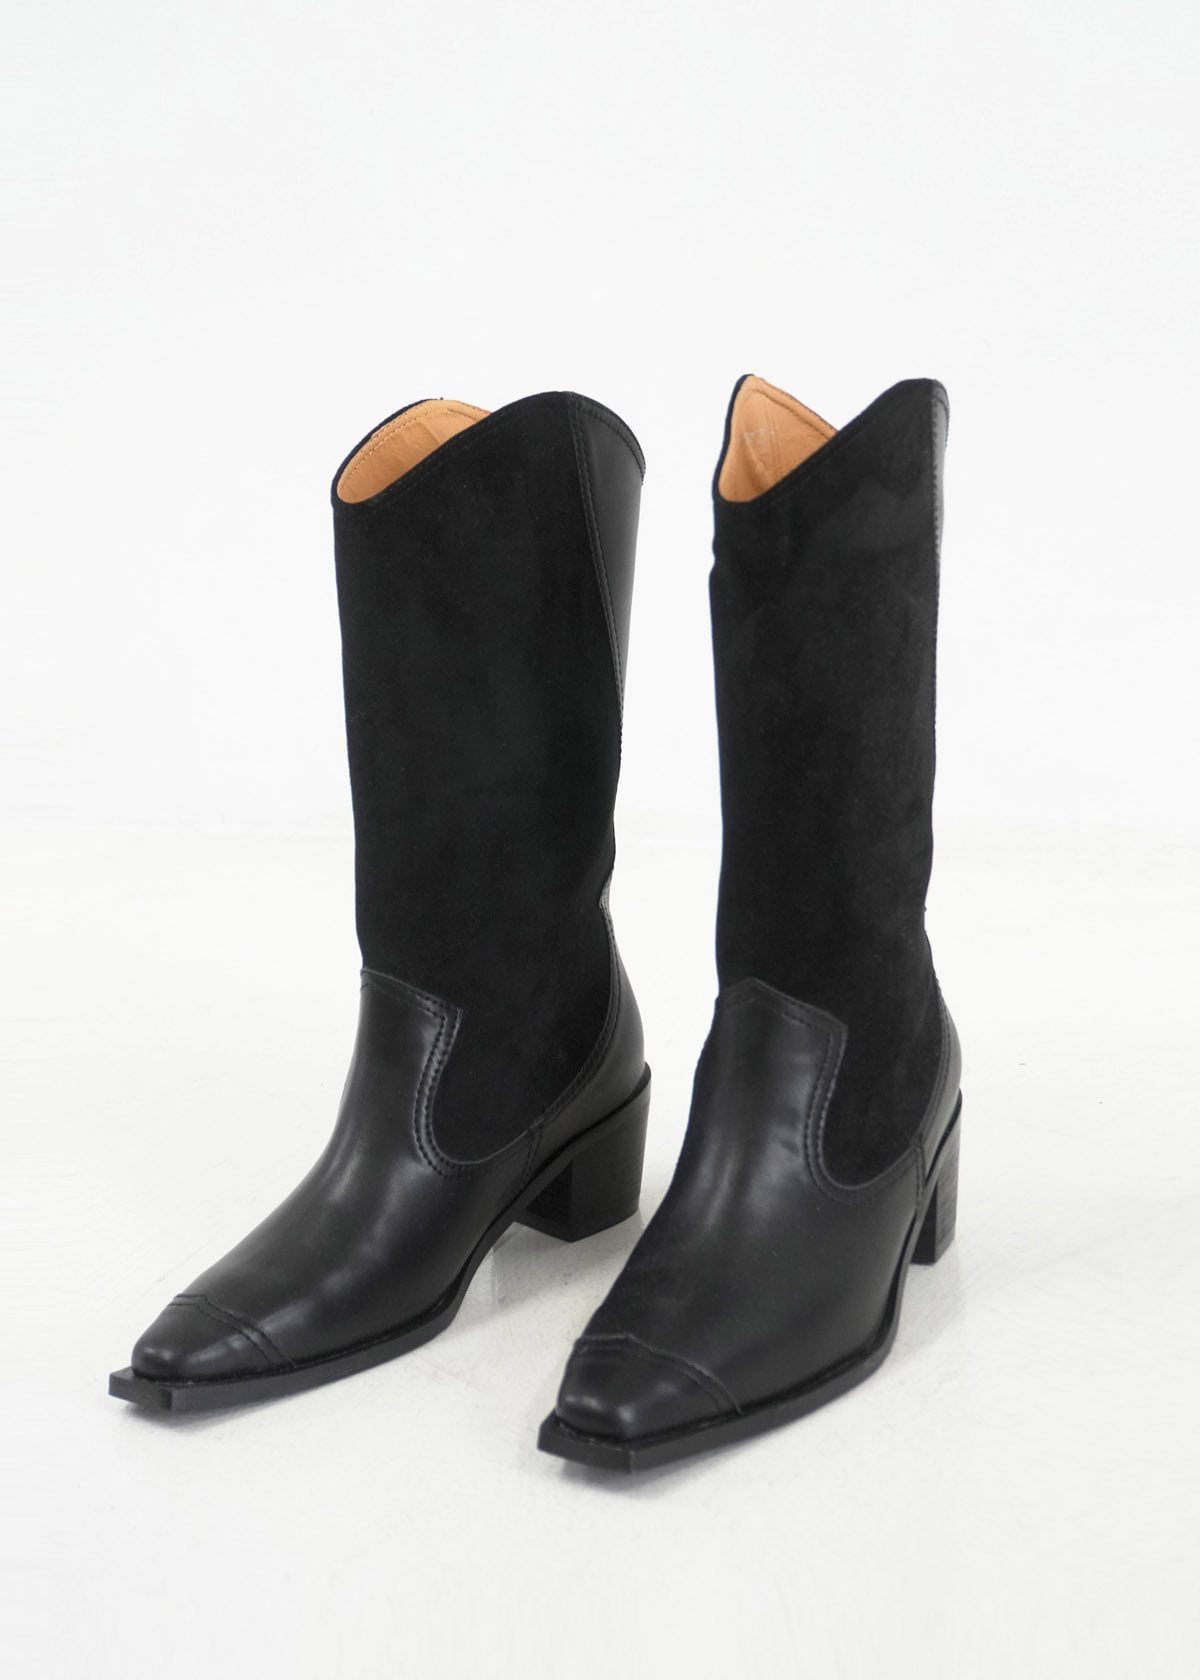 Suede Western Leather Boots (Black)